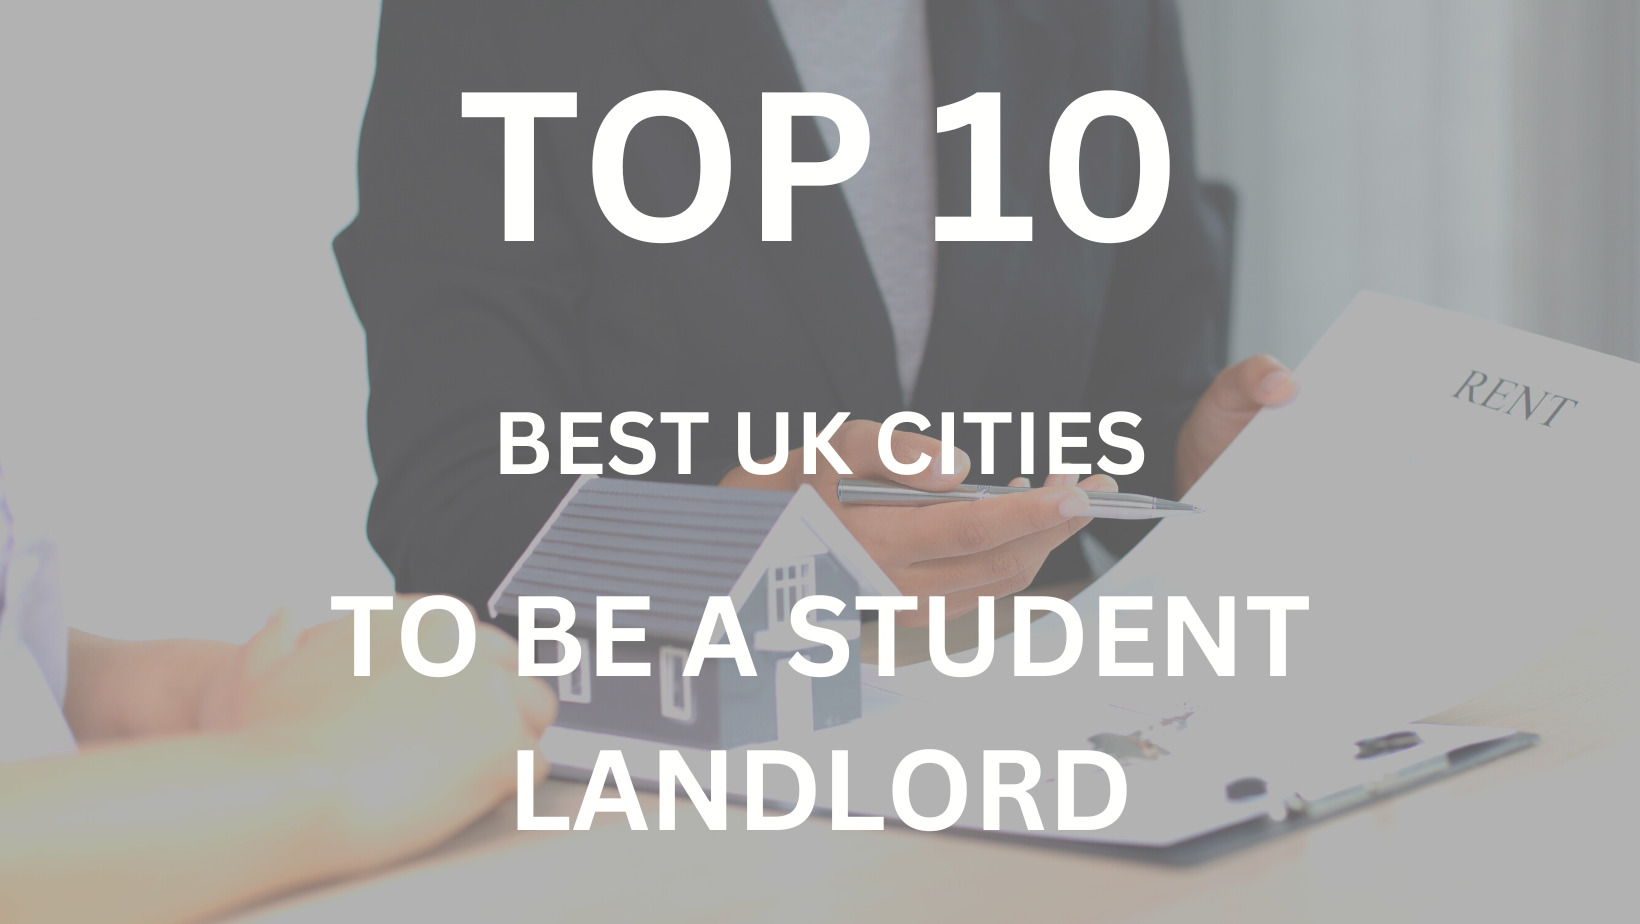 Thinking of becoming a student landlord? Here are our best 10 UK cities for it!